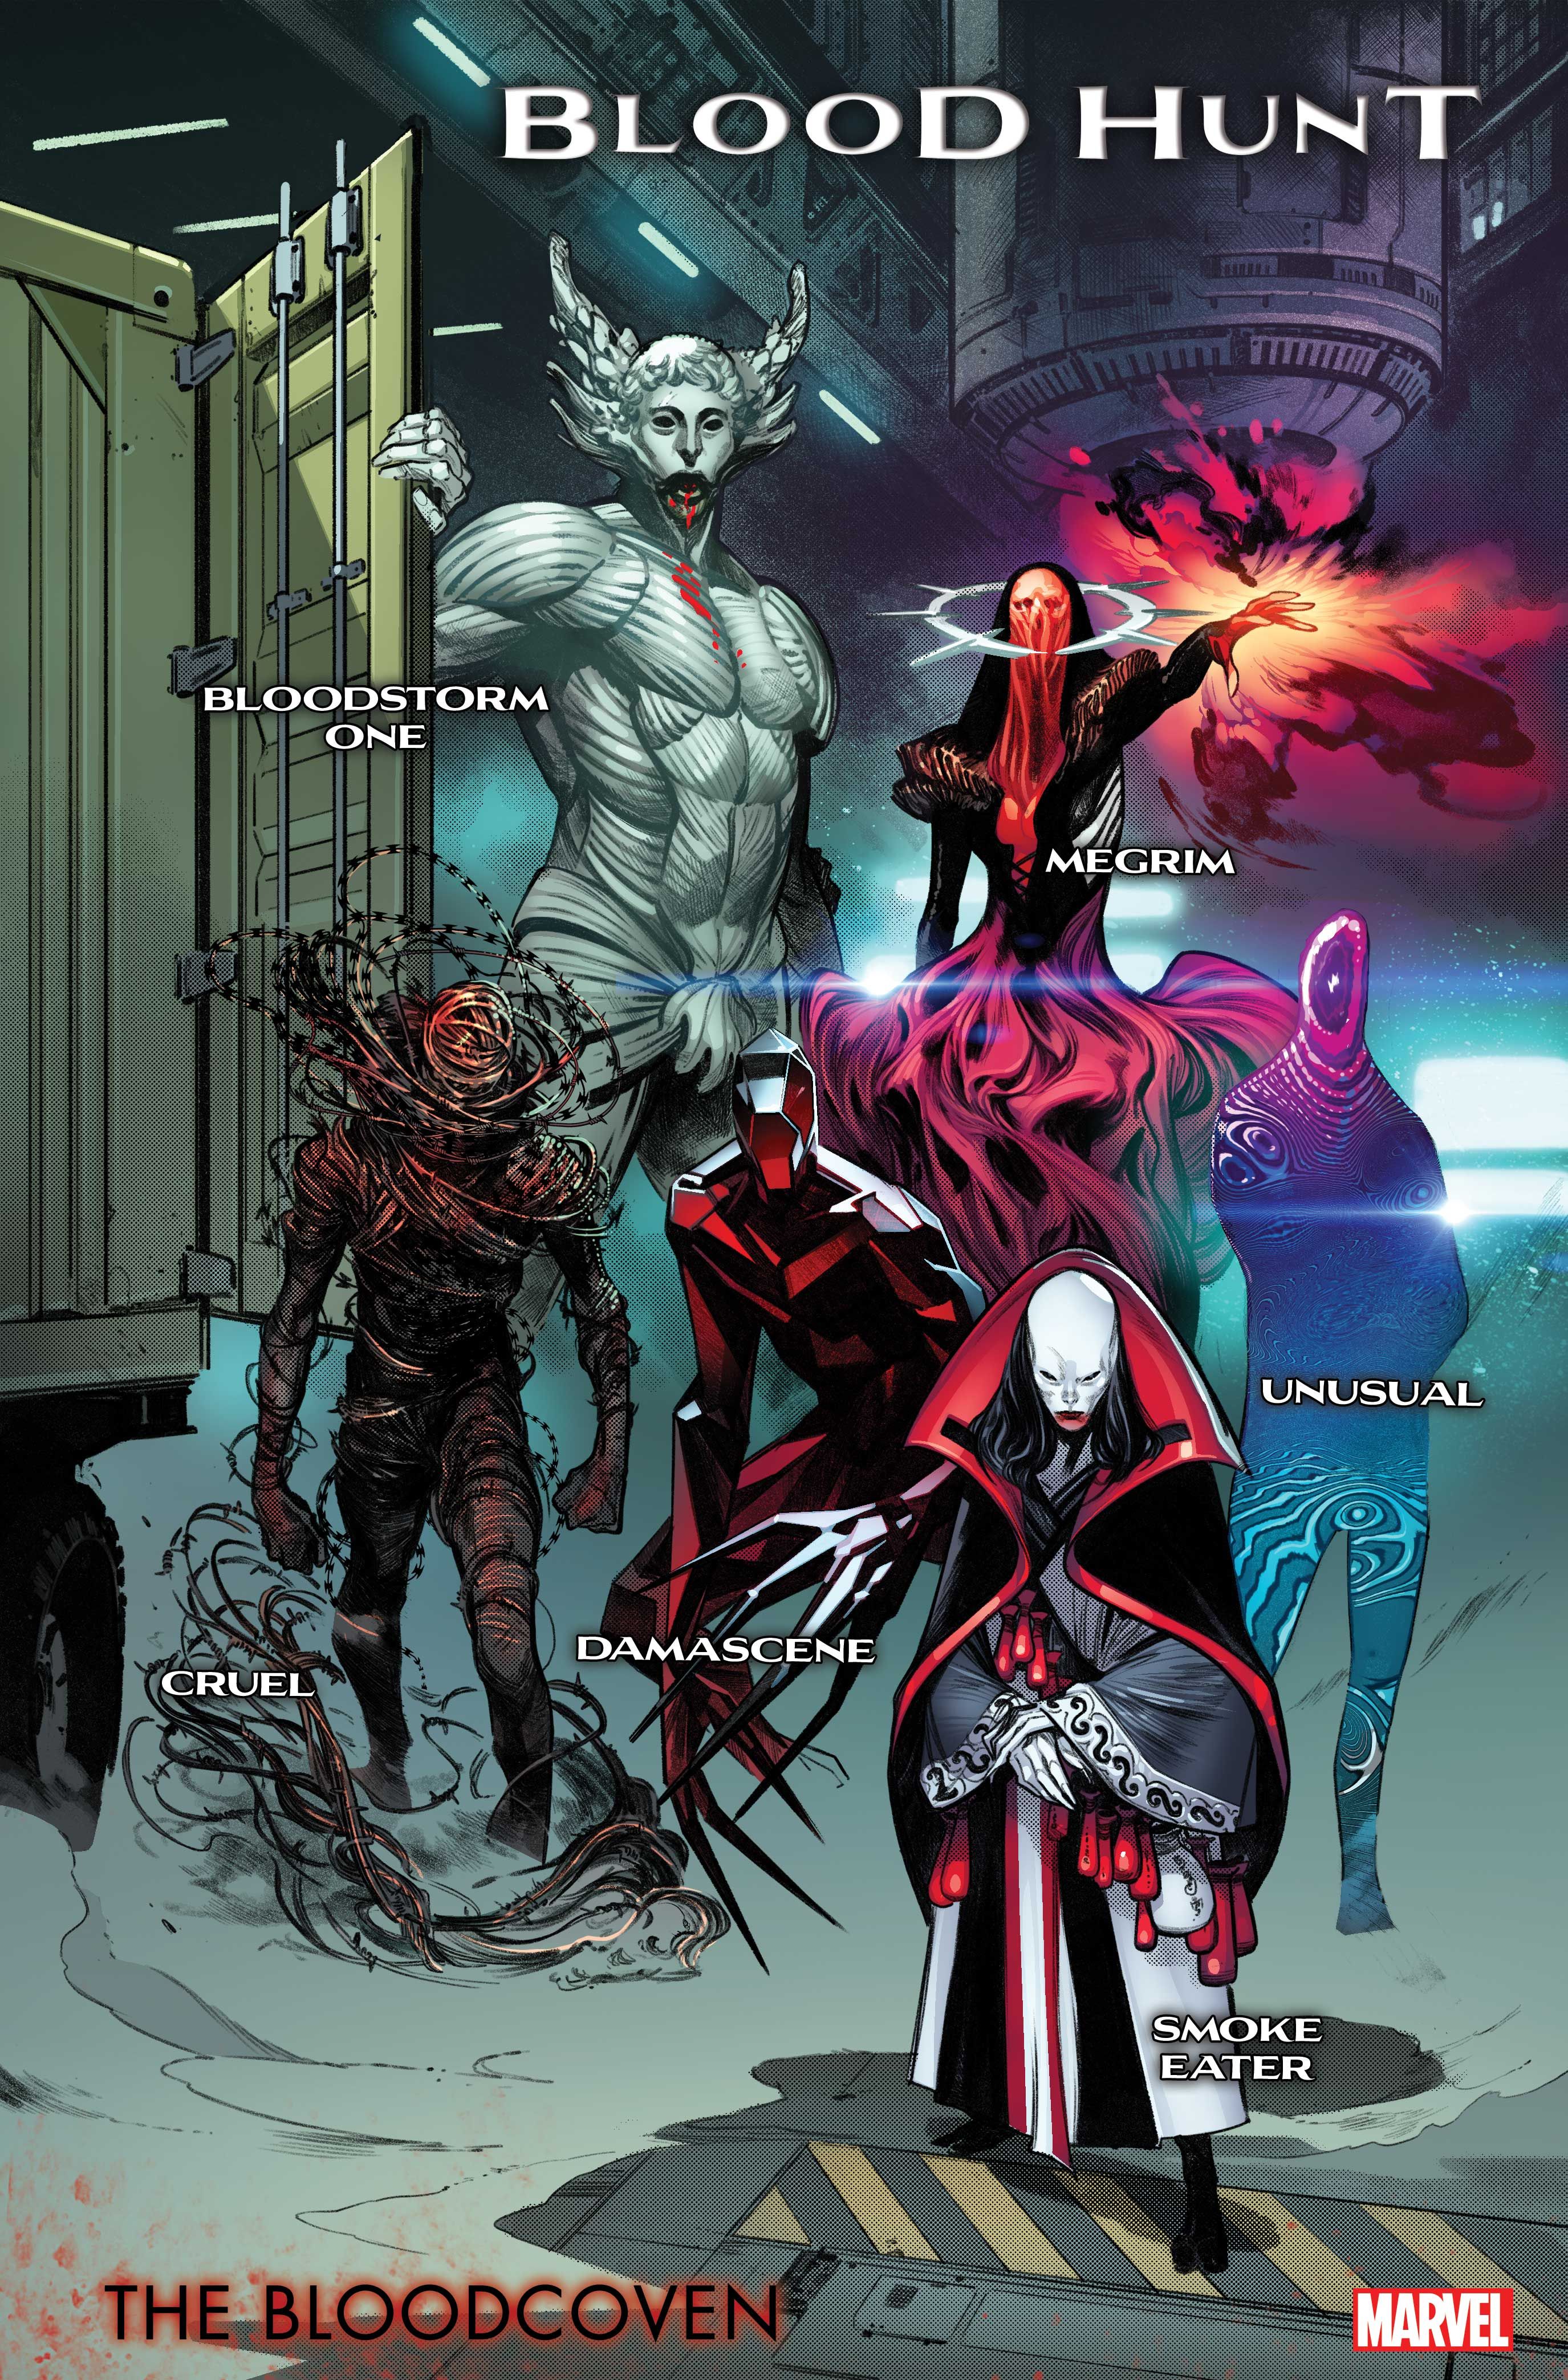 BLOODHUNT are introduces the villains known as the Bloodcoven - monstrous vampires